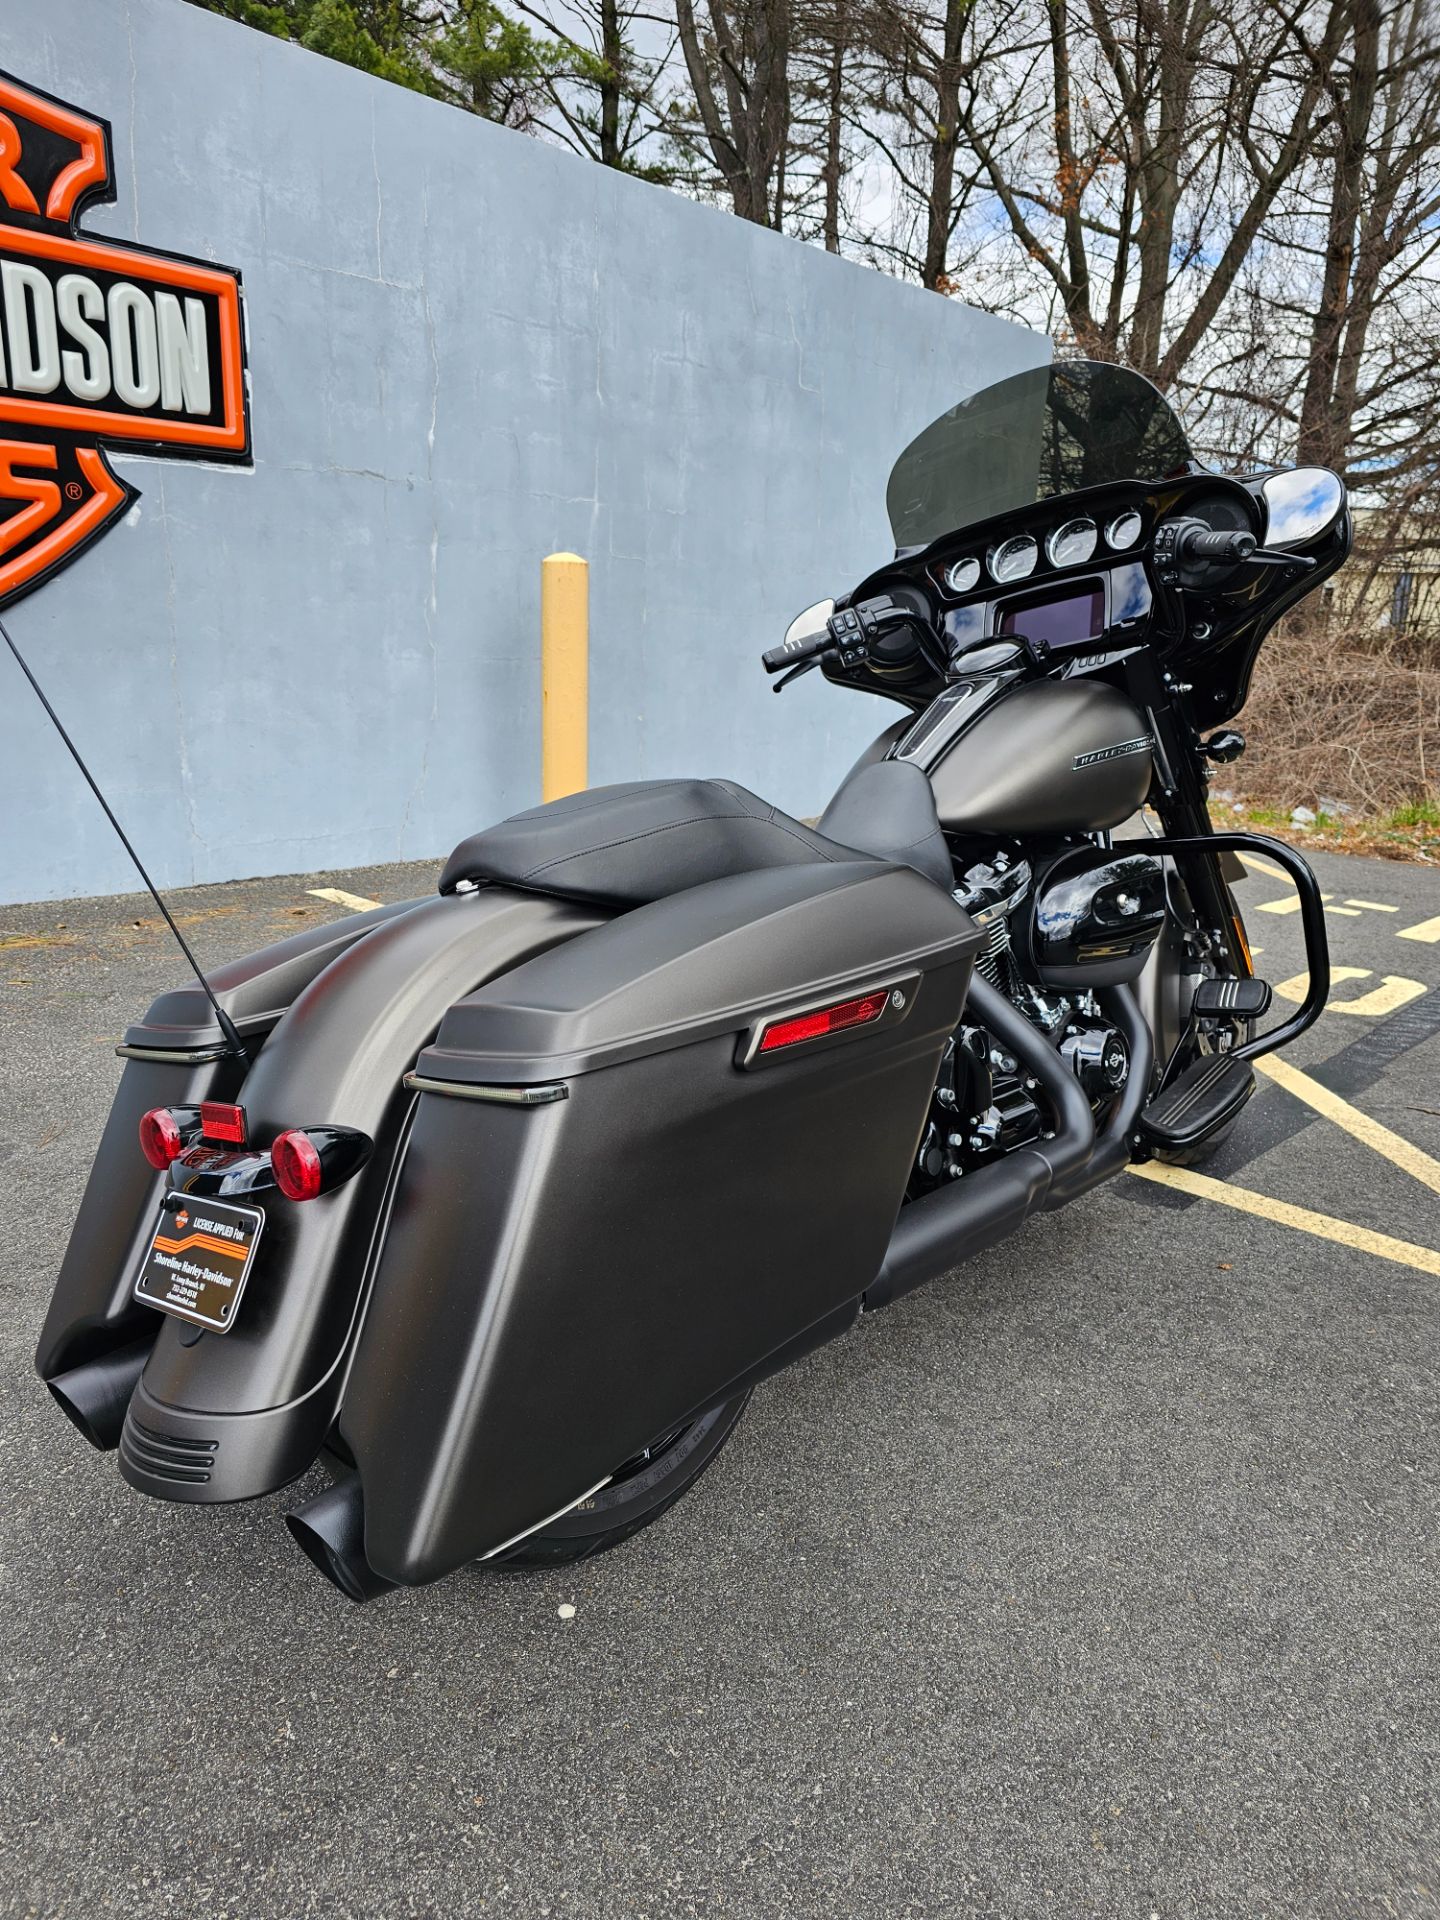 2020 Harley-Davidson Street Glide® Special in West Long Branch, New Jersey - Photo 8